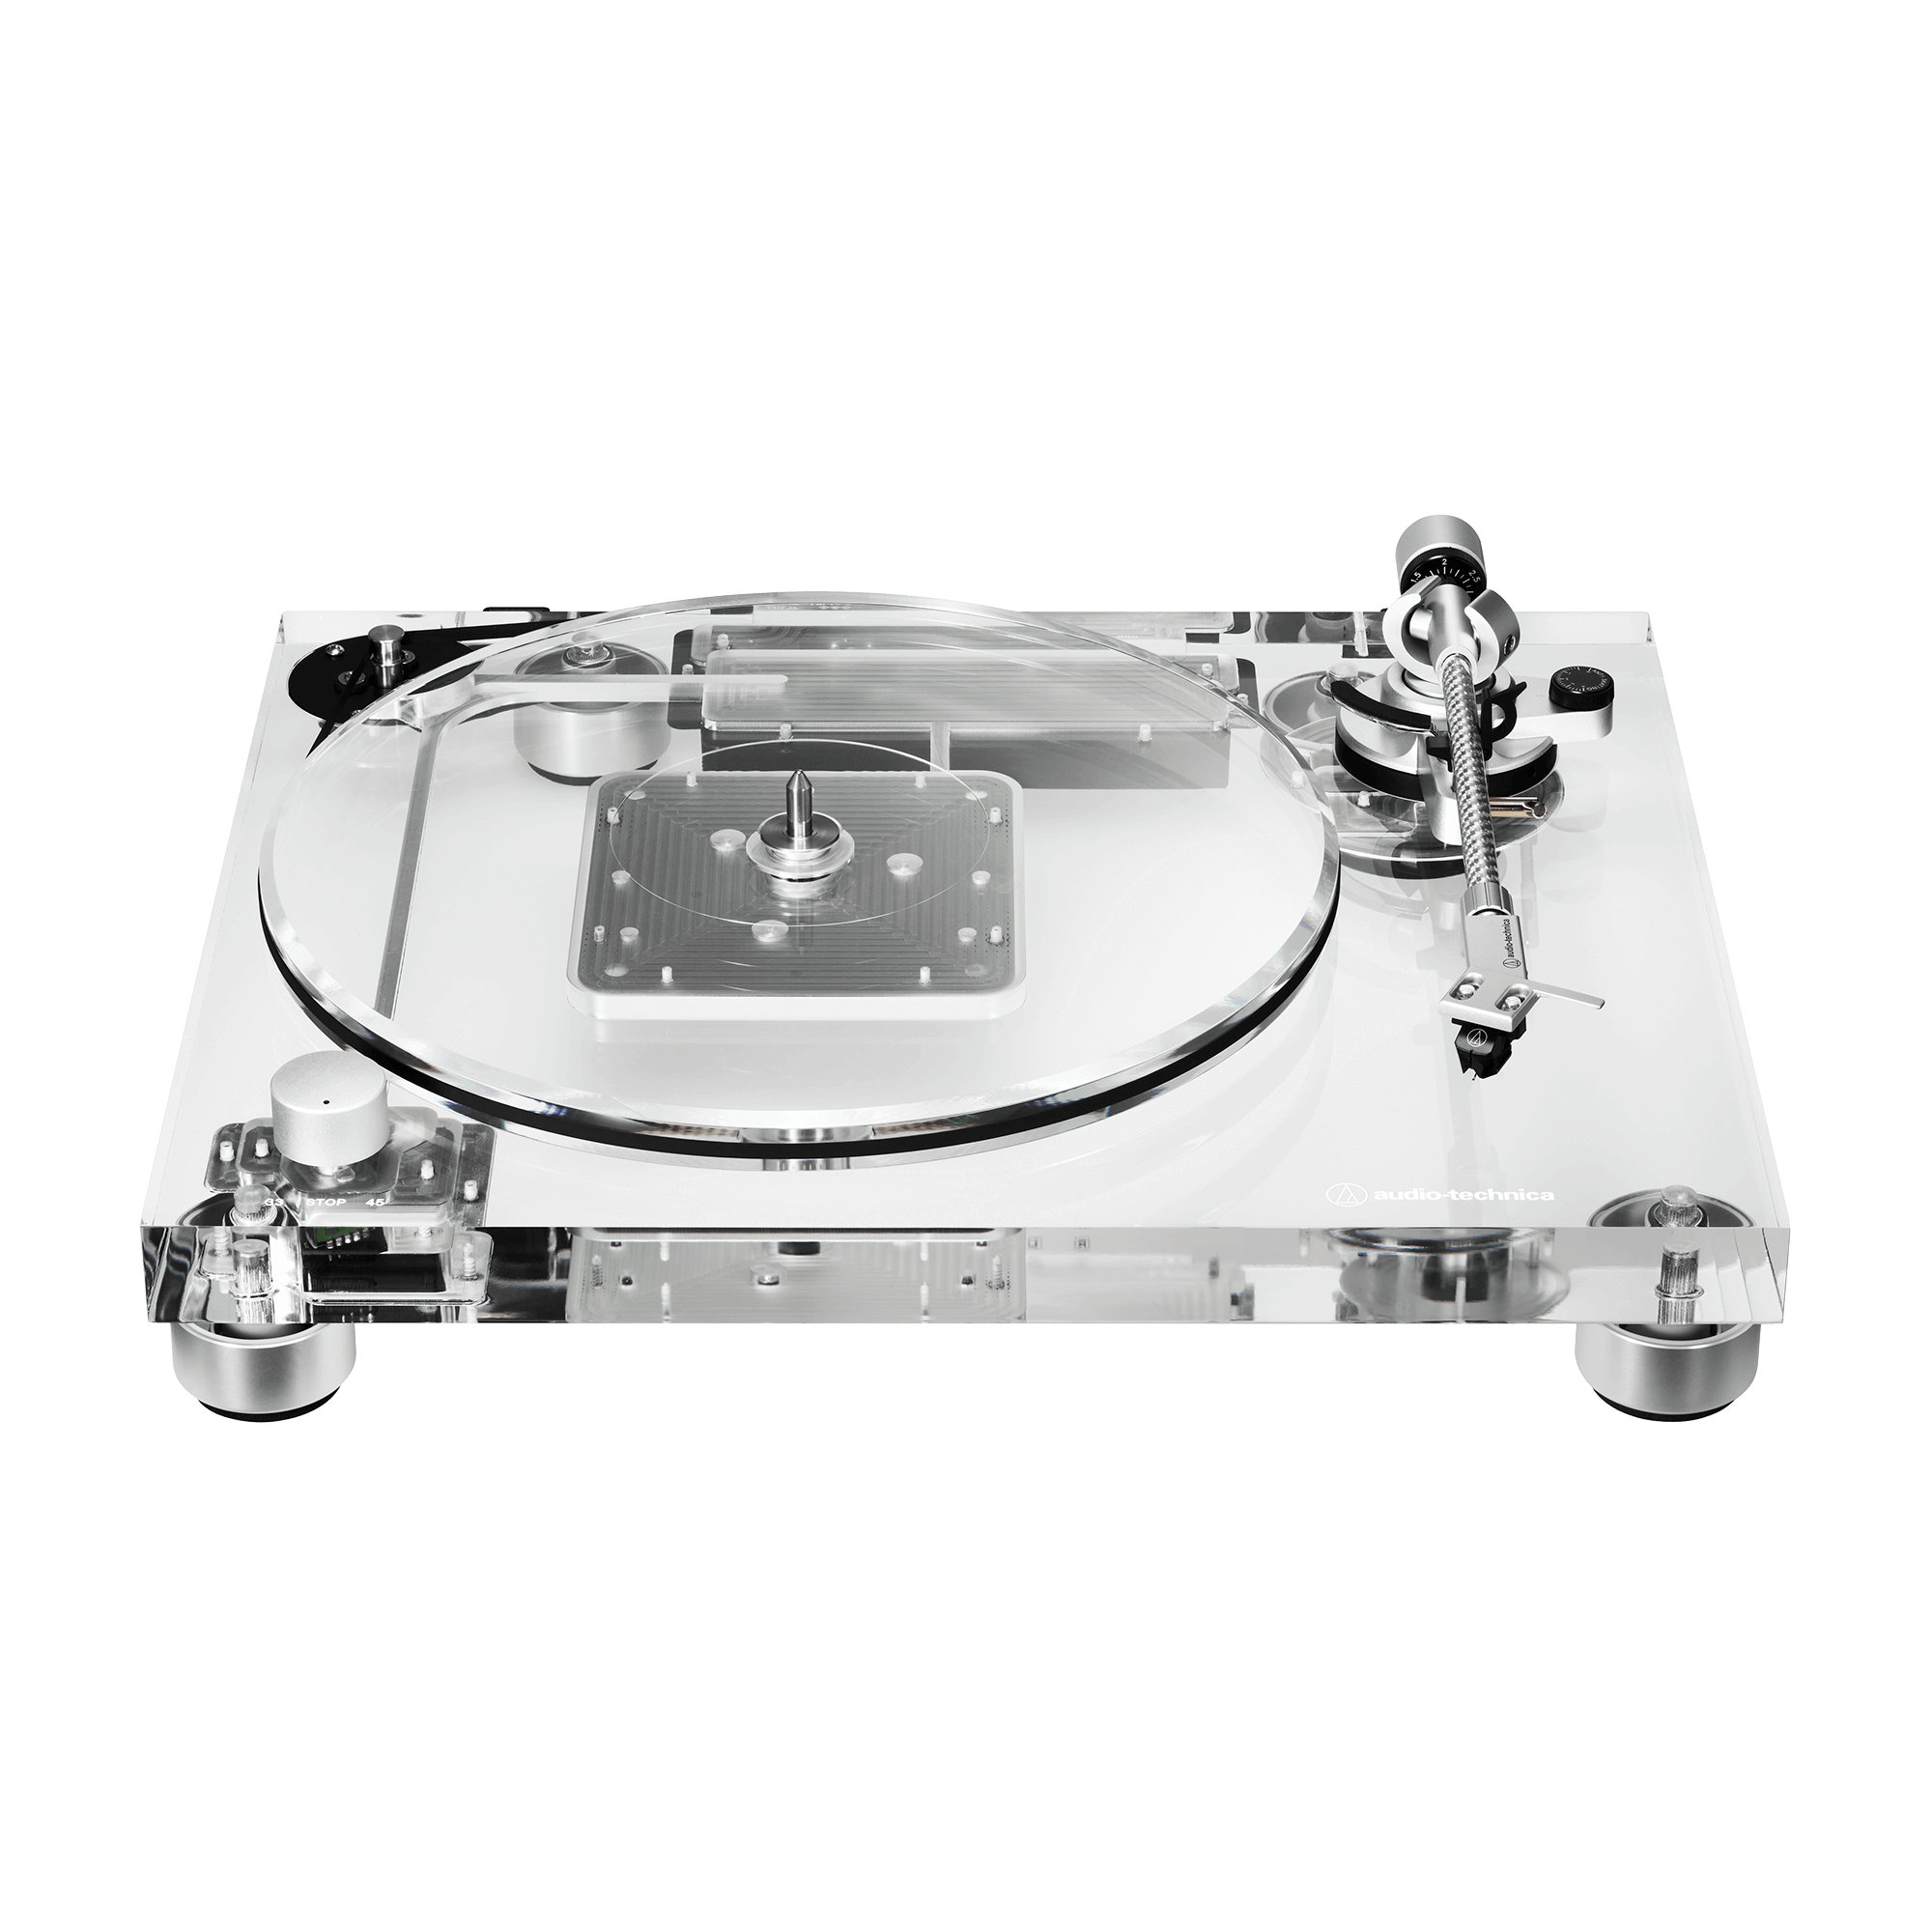 Audio-Technica Introduces Its 60th Anniversary AT-LP2022 Turntable